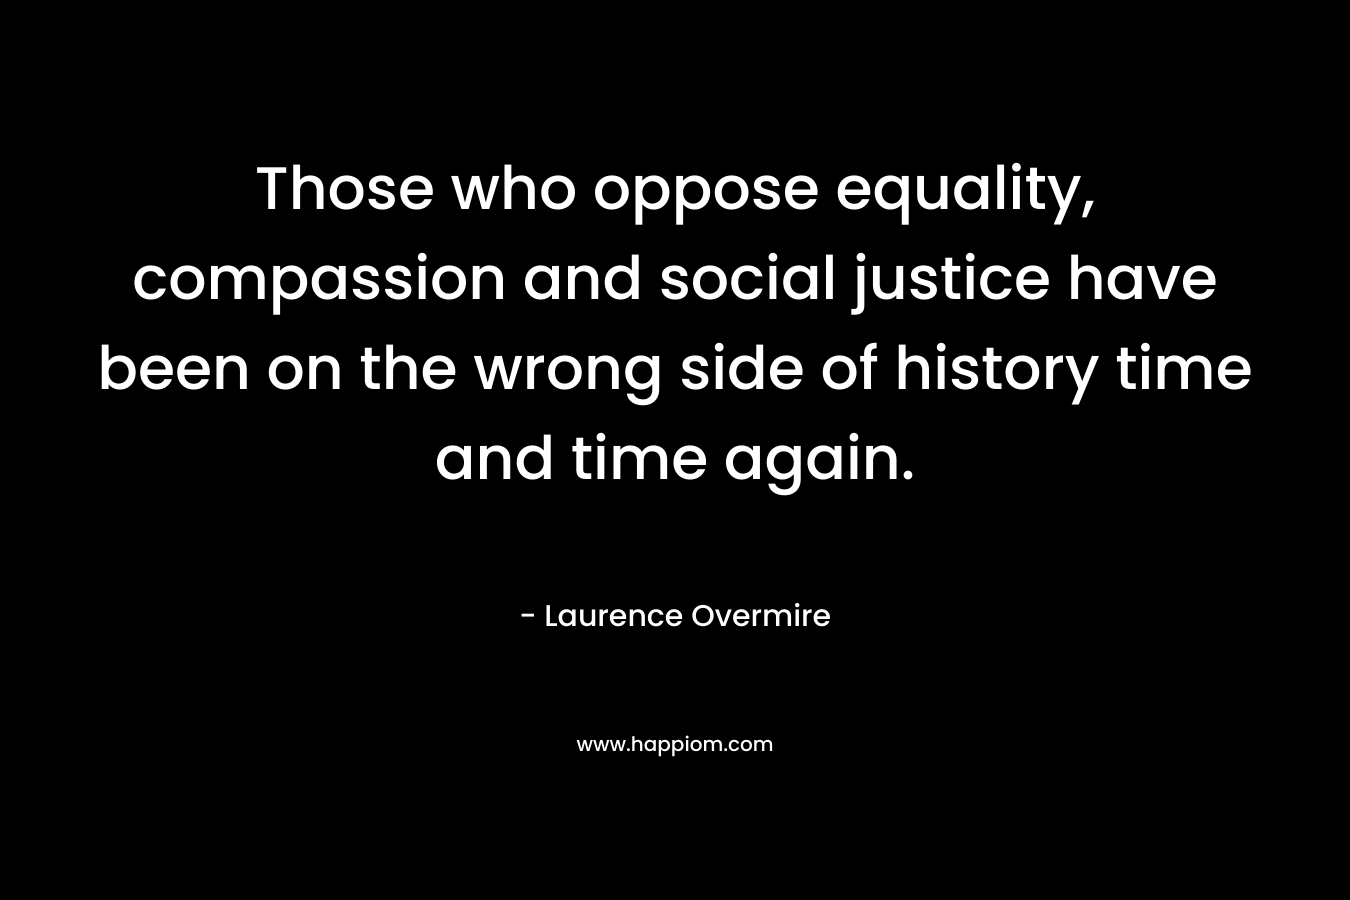 Those who oppose equality, compassion and social justice have been on the wrong side of history time and time again.